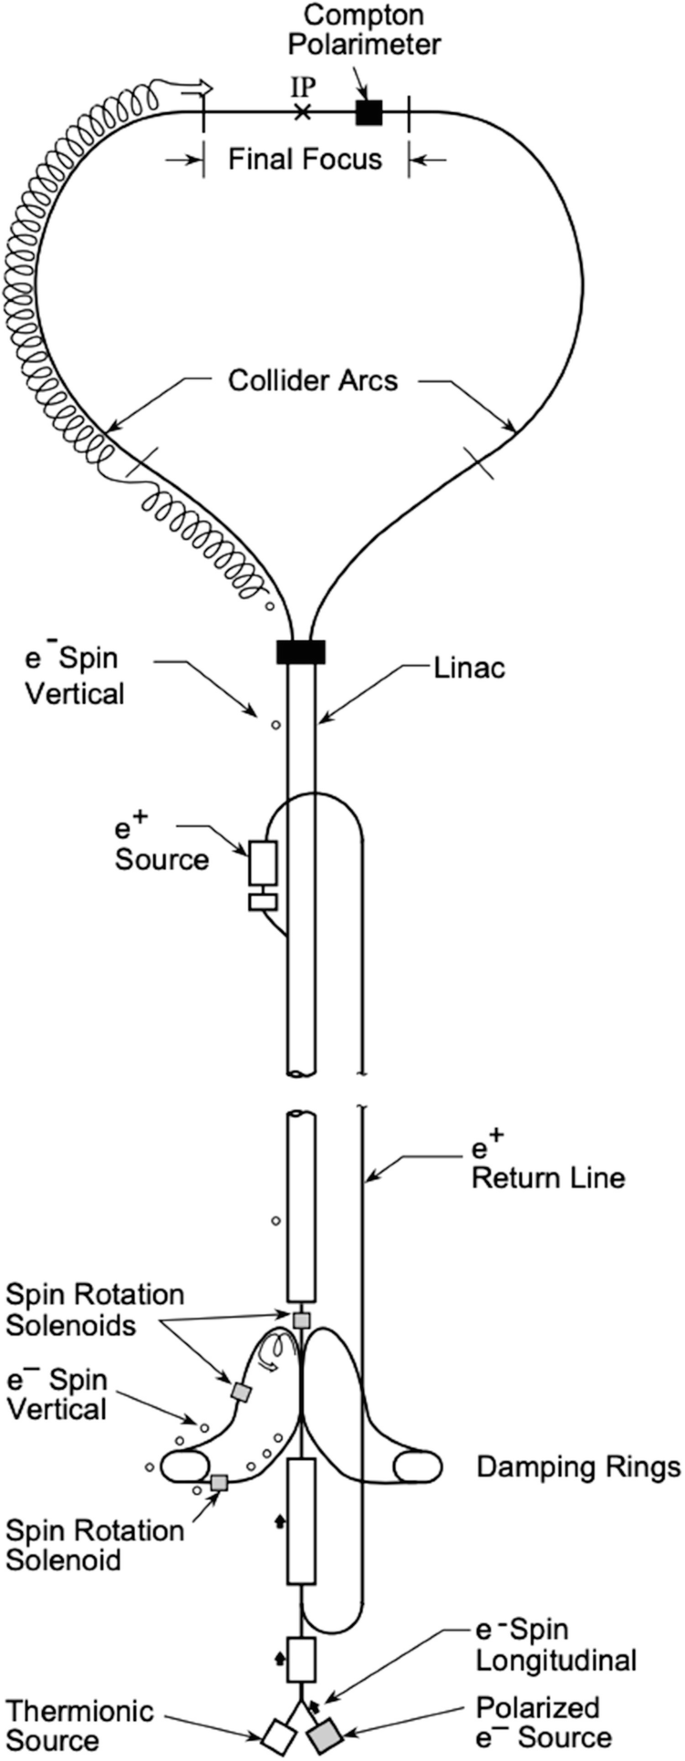 A layout of a collider includes a Compton polarimeter, collider arcs, electron spin vertical, linac, e plus source, solenoids, and damping rings among other components.